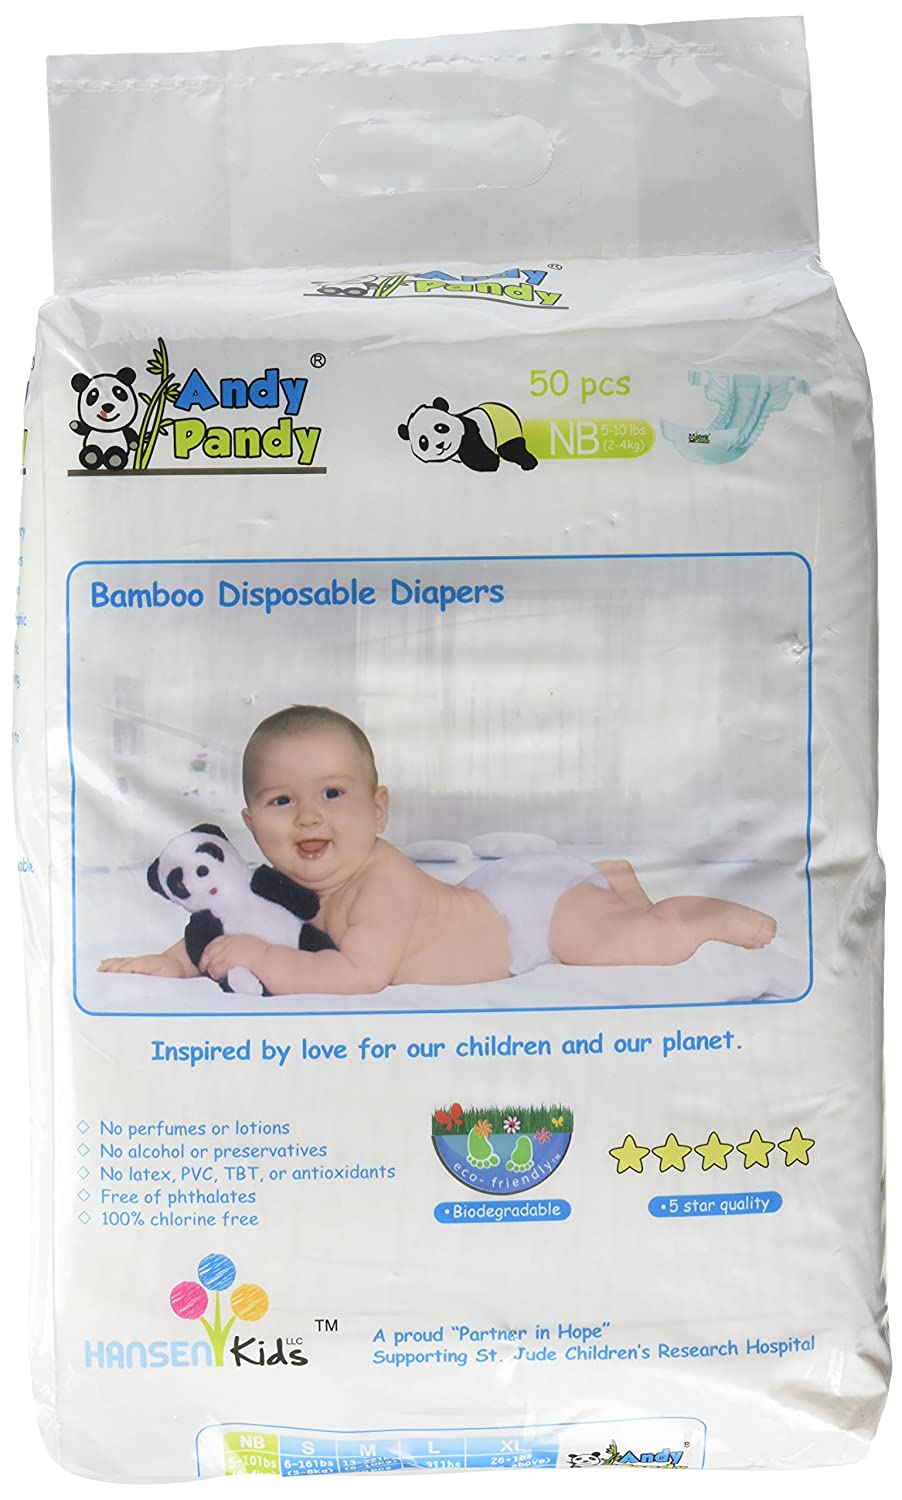 Top 7 Best Natural Disposable Diapers Reviews in 2022 5